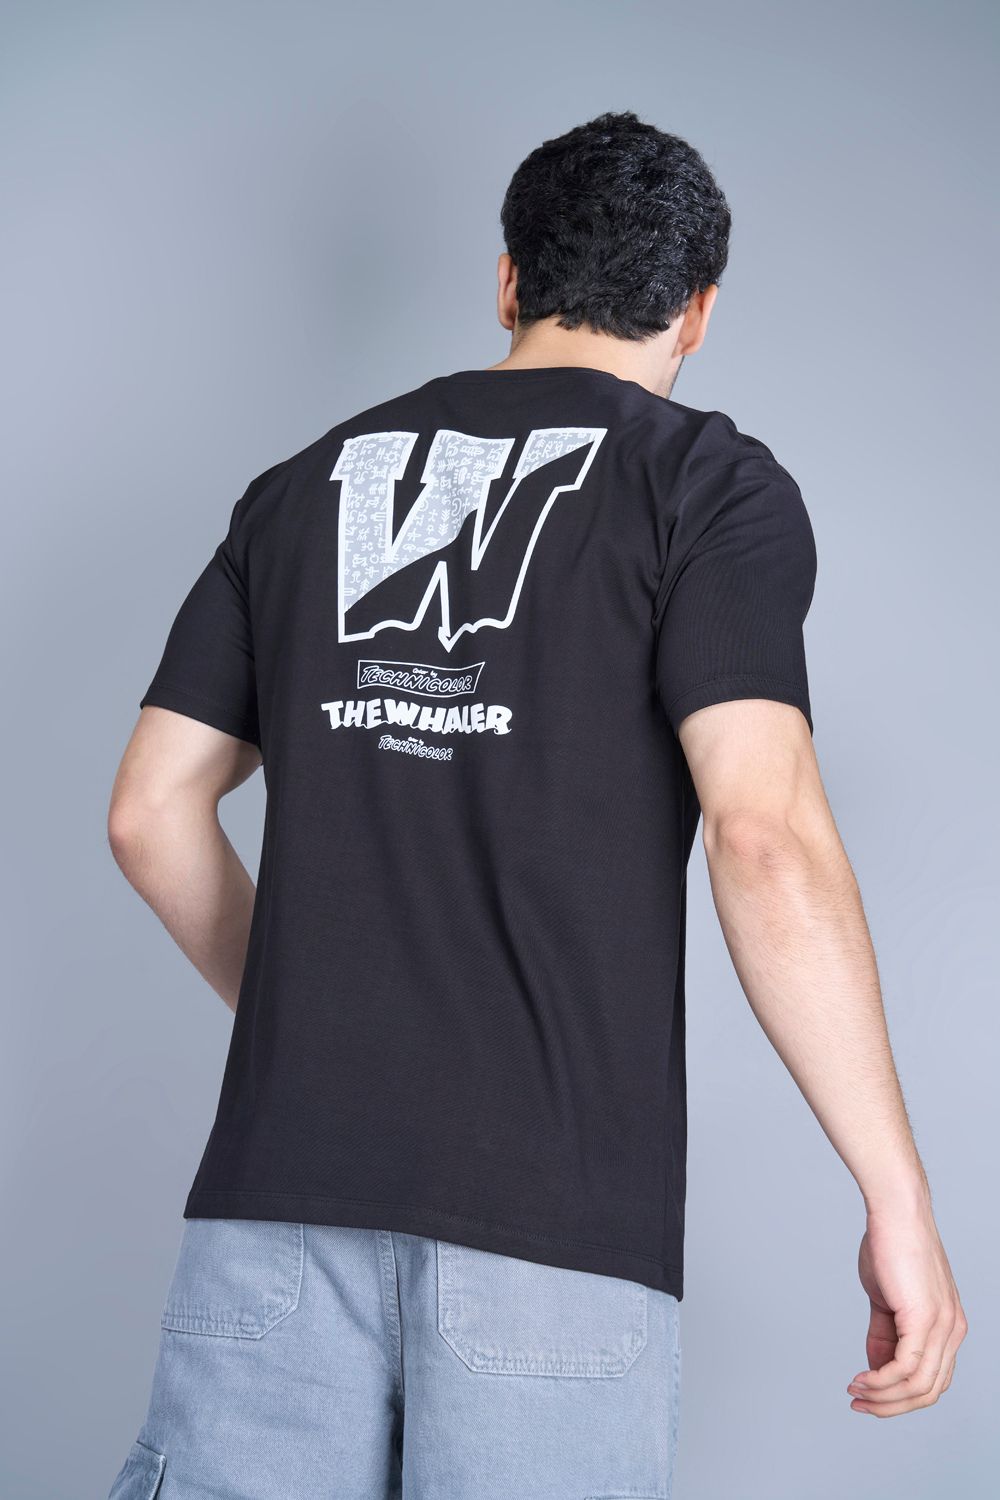 Cotton oversized T shirt for men in the solid color black with half sleeves and crew neck, back view.